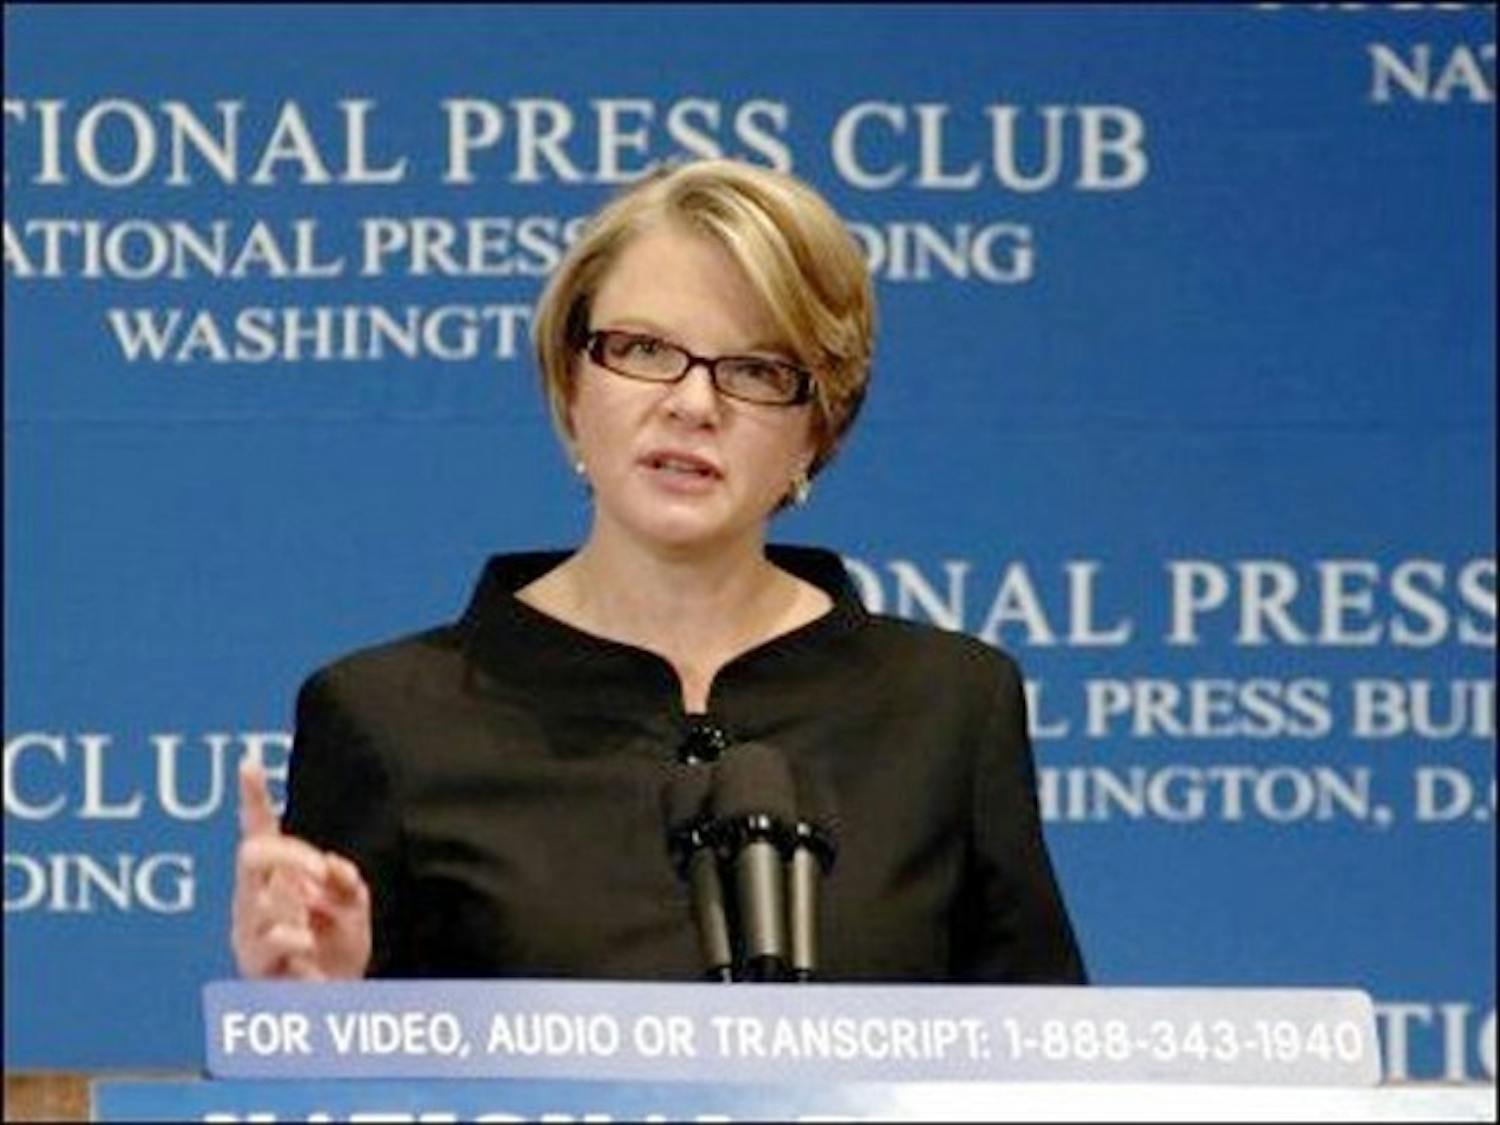 U.S. Secretary of Education Margaret Spellings announces her plan to improve higher education at the National Press Club on Tuesday, Sept. 26.